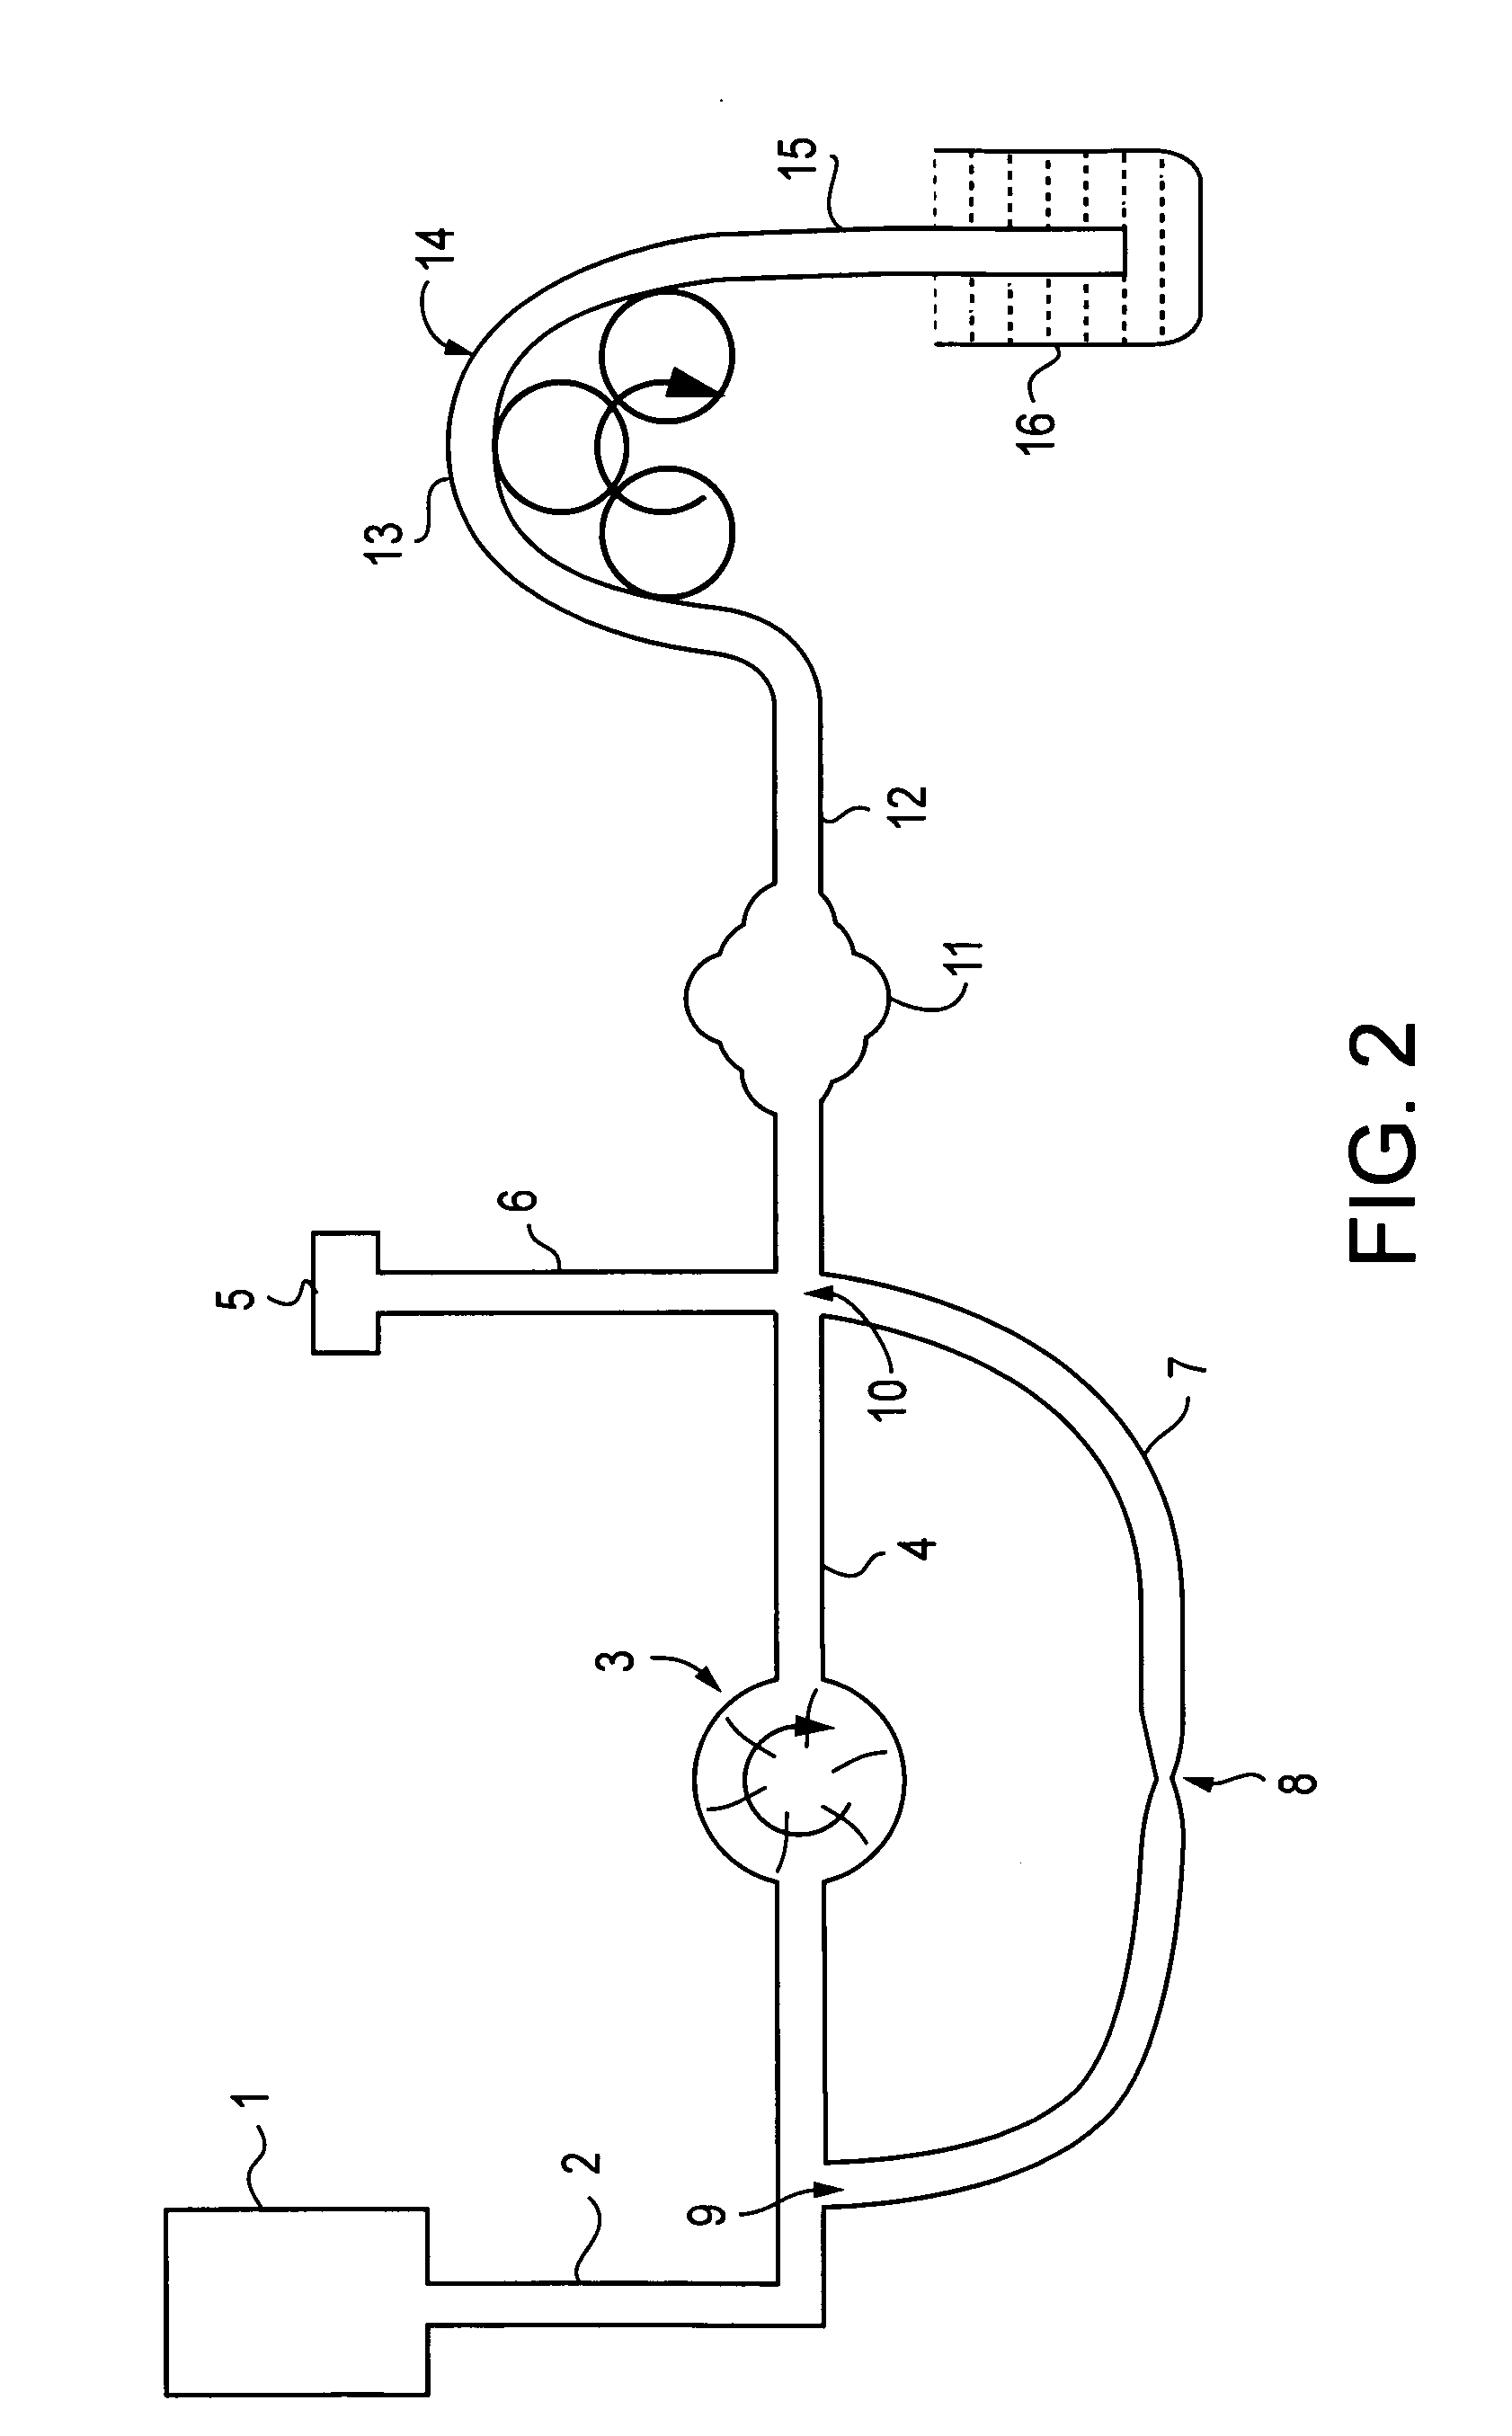 Controlled tissue cavity distending system with minimal turbulence